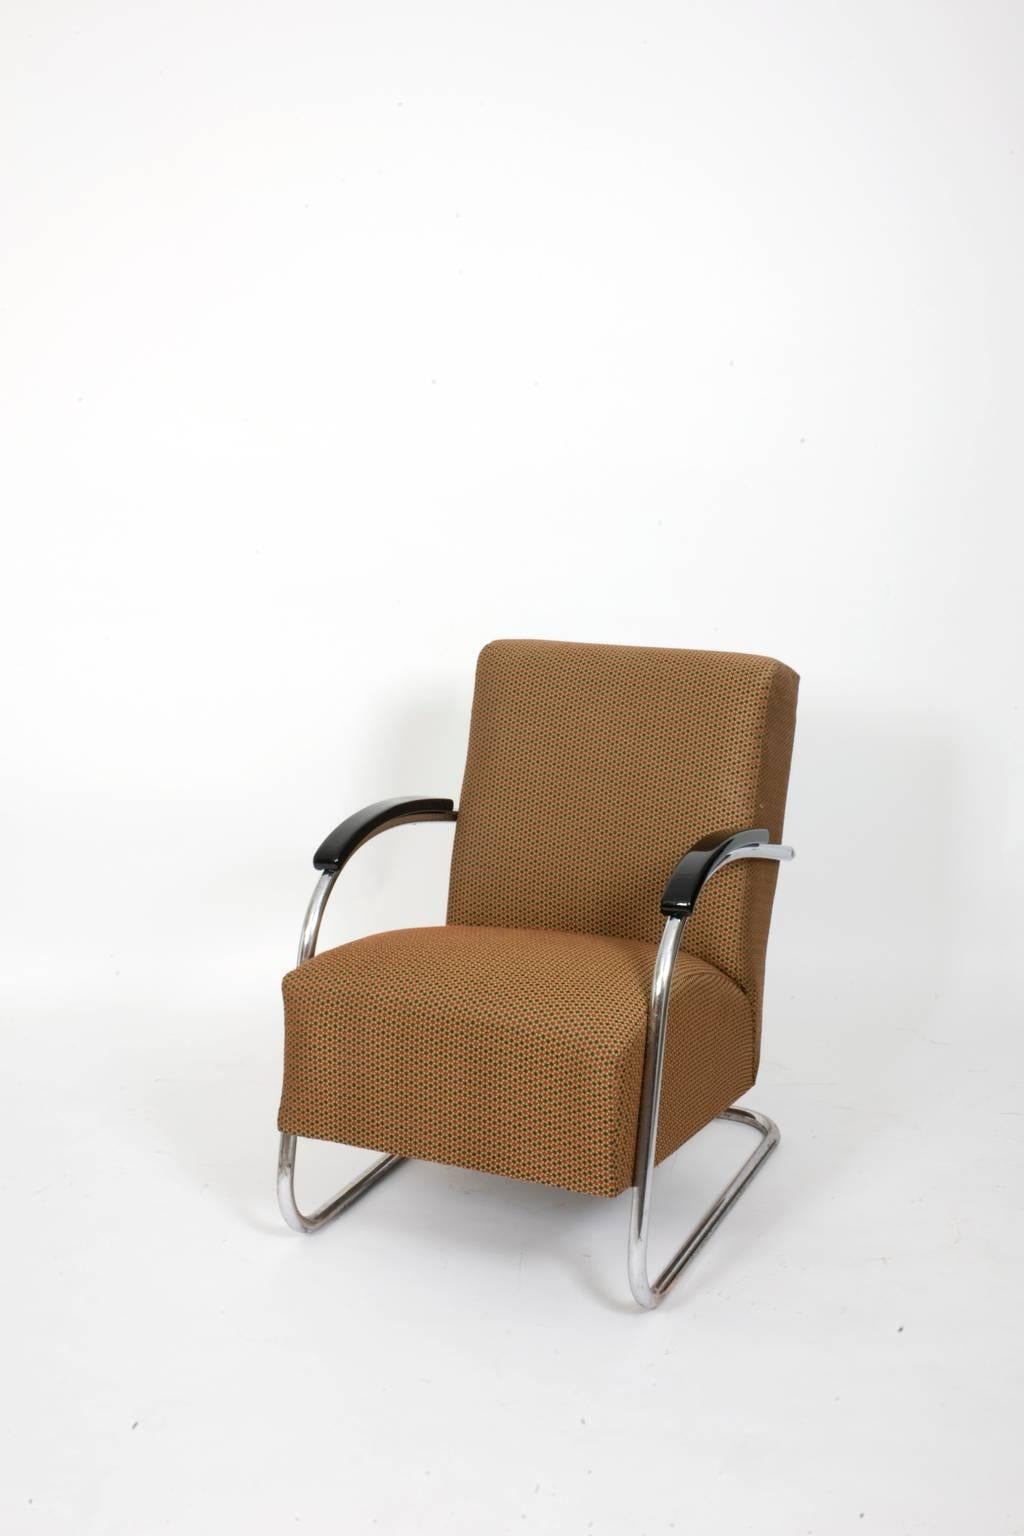 This pair of armchairs in the style of Bauhaus was manufactured by Mücke & Melder, circa 1930.